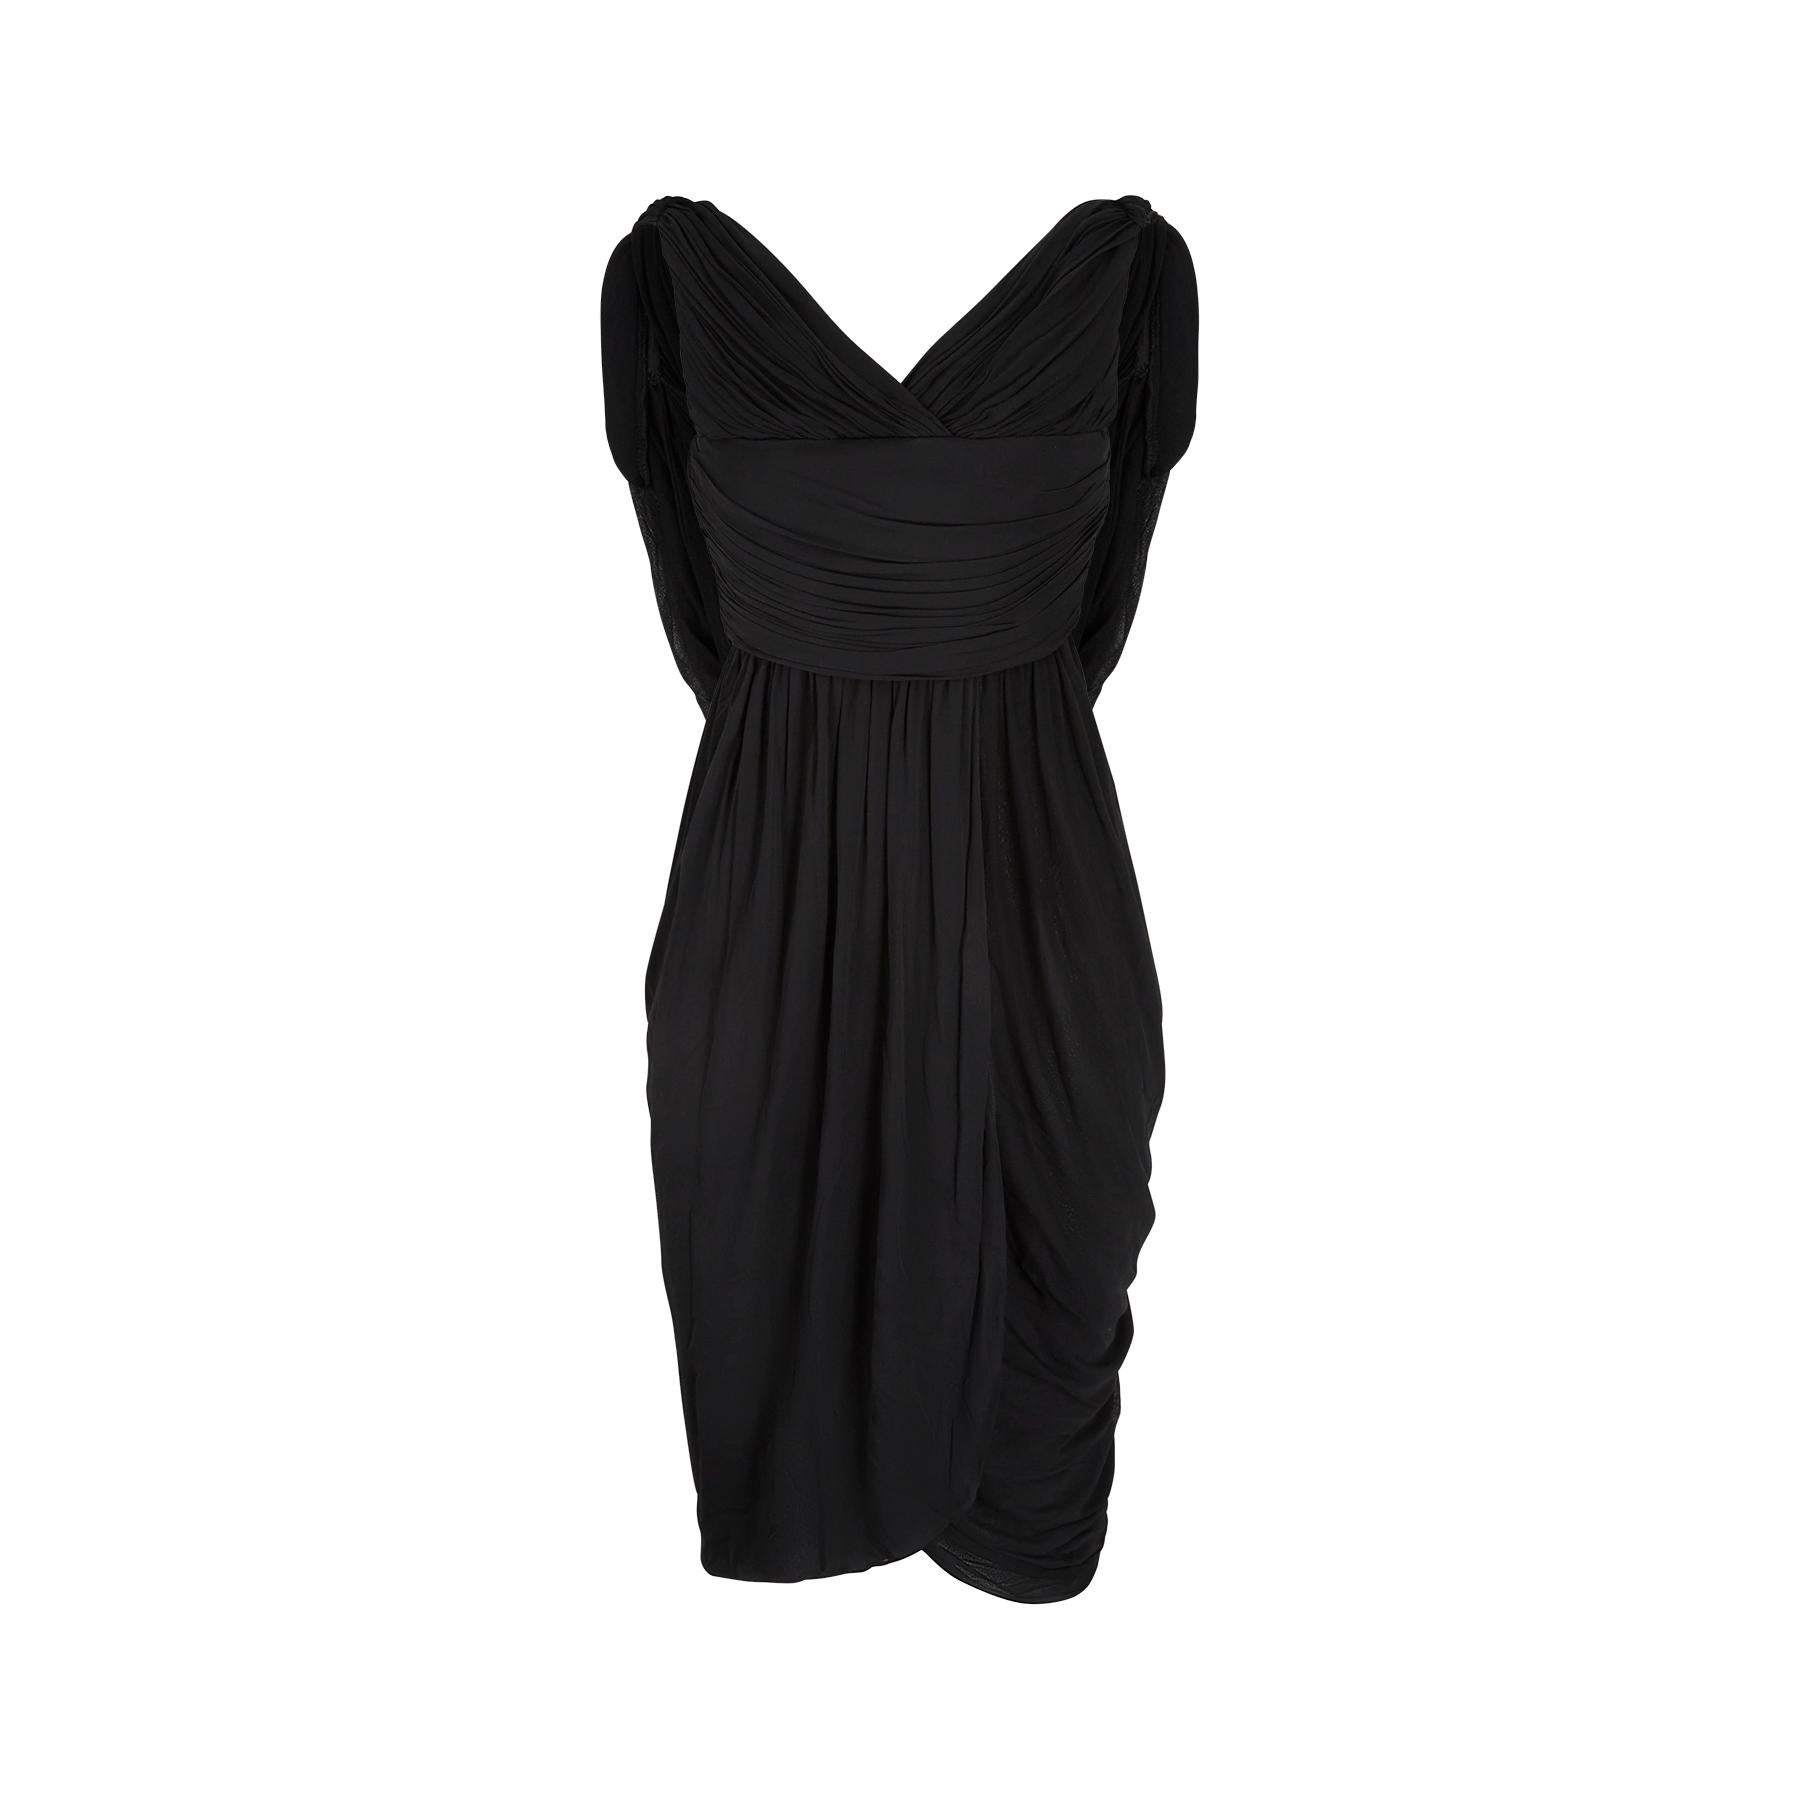 An absolutely superb and collectable Halston black label couture 1970s goddess dress. Halston clearly took inspiration from an earlier era and this has elements of 1940s and 1950s fashion. It is impeccably made with a lavish amount of pleating,